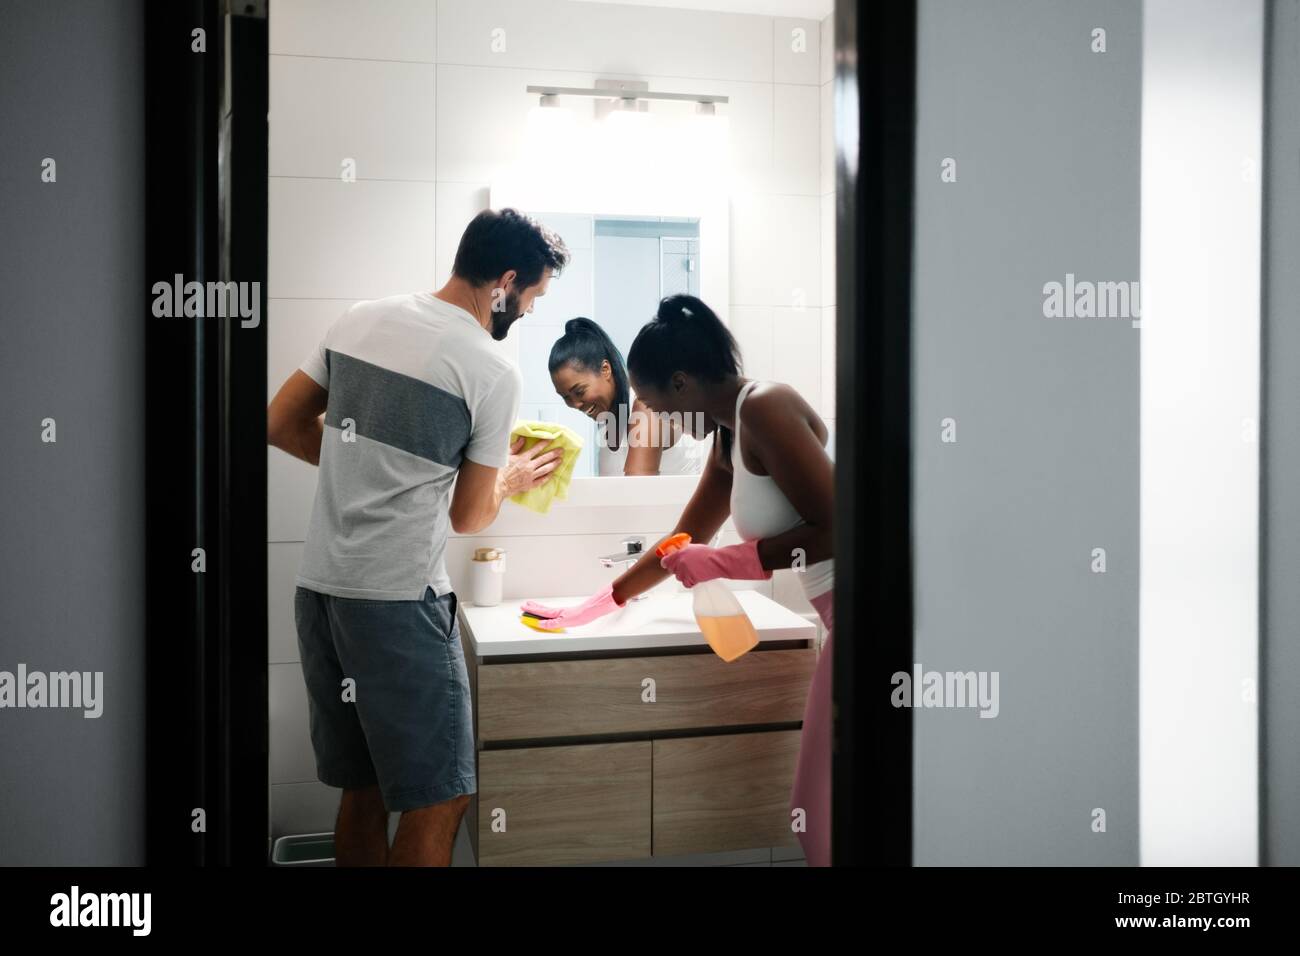 Multiethnic People Doing Chores Cleaning Home Bathroom Stock Photo